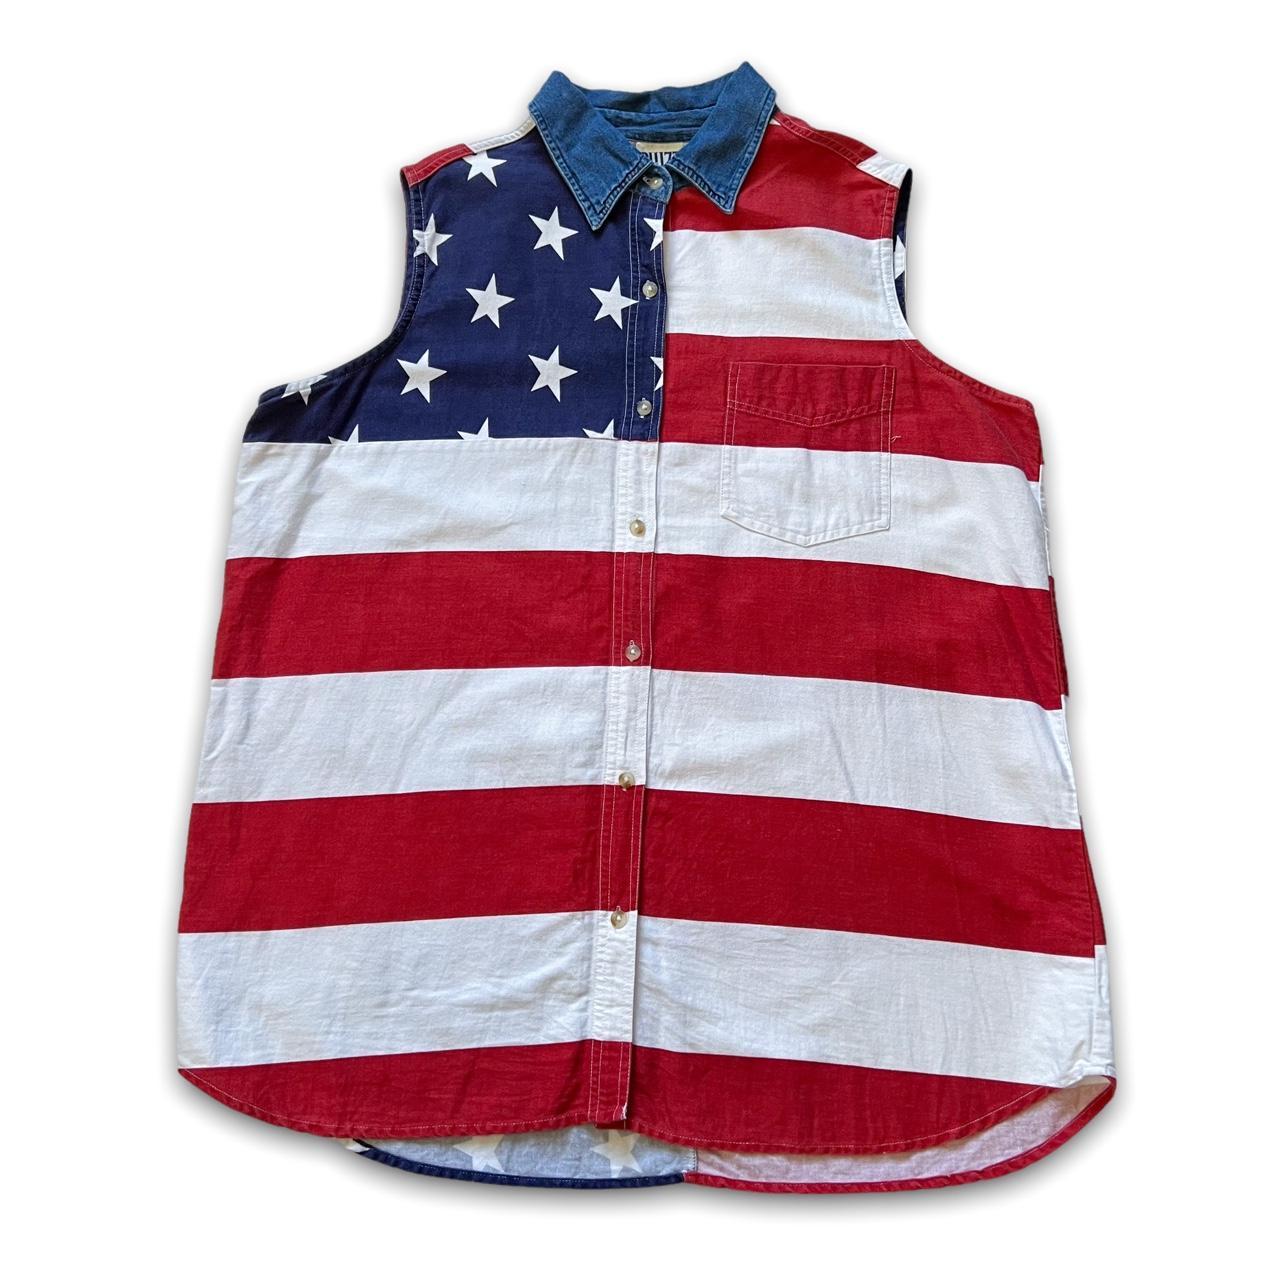 Product Image 1 - Vintage American Flag Shirt

90s American